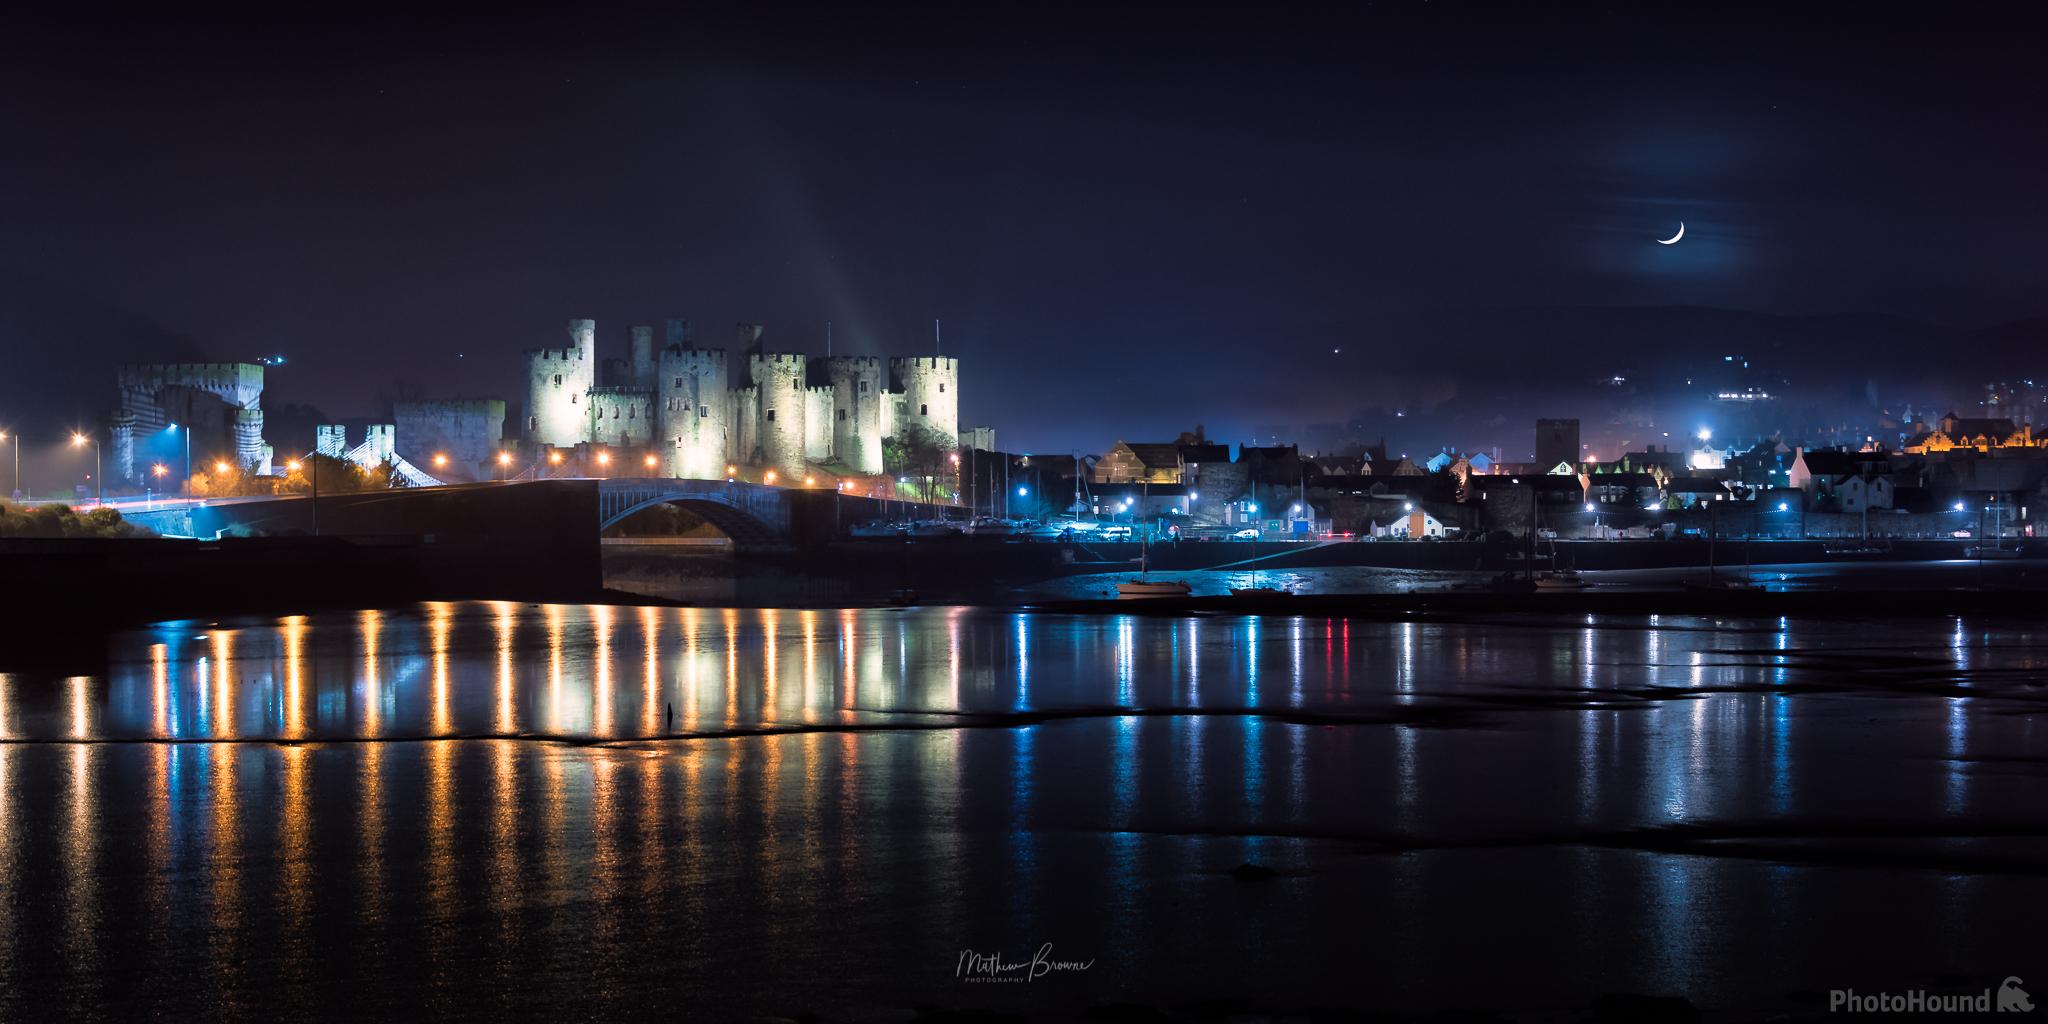 Image of Conwy Castle & Bridge by Mathew Browne